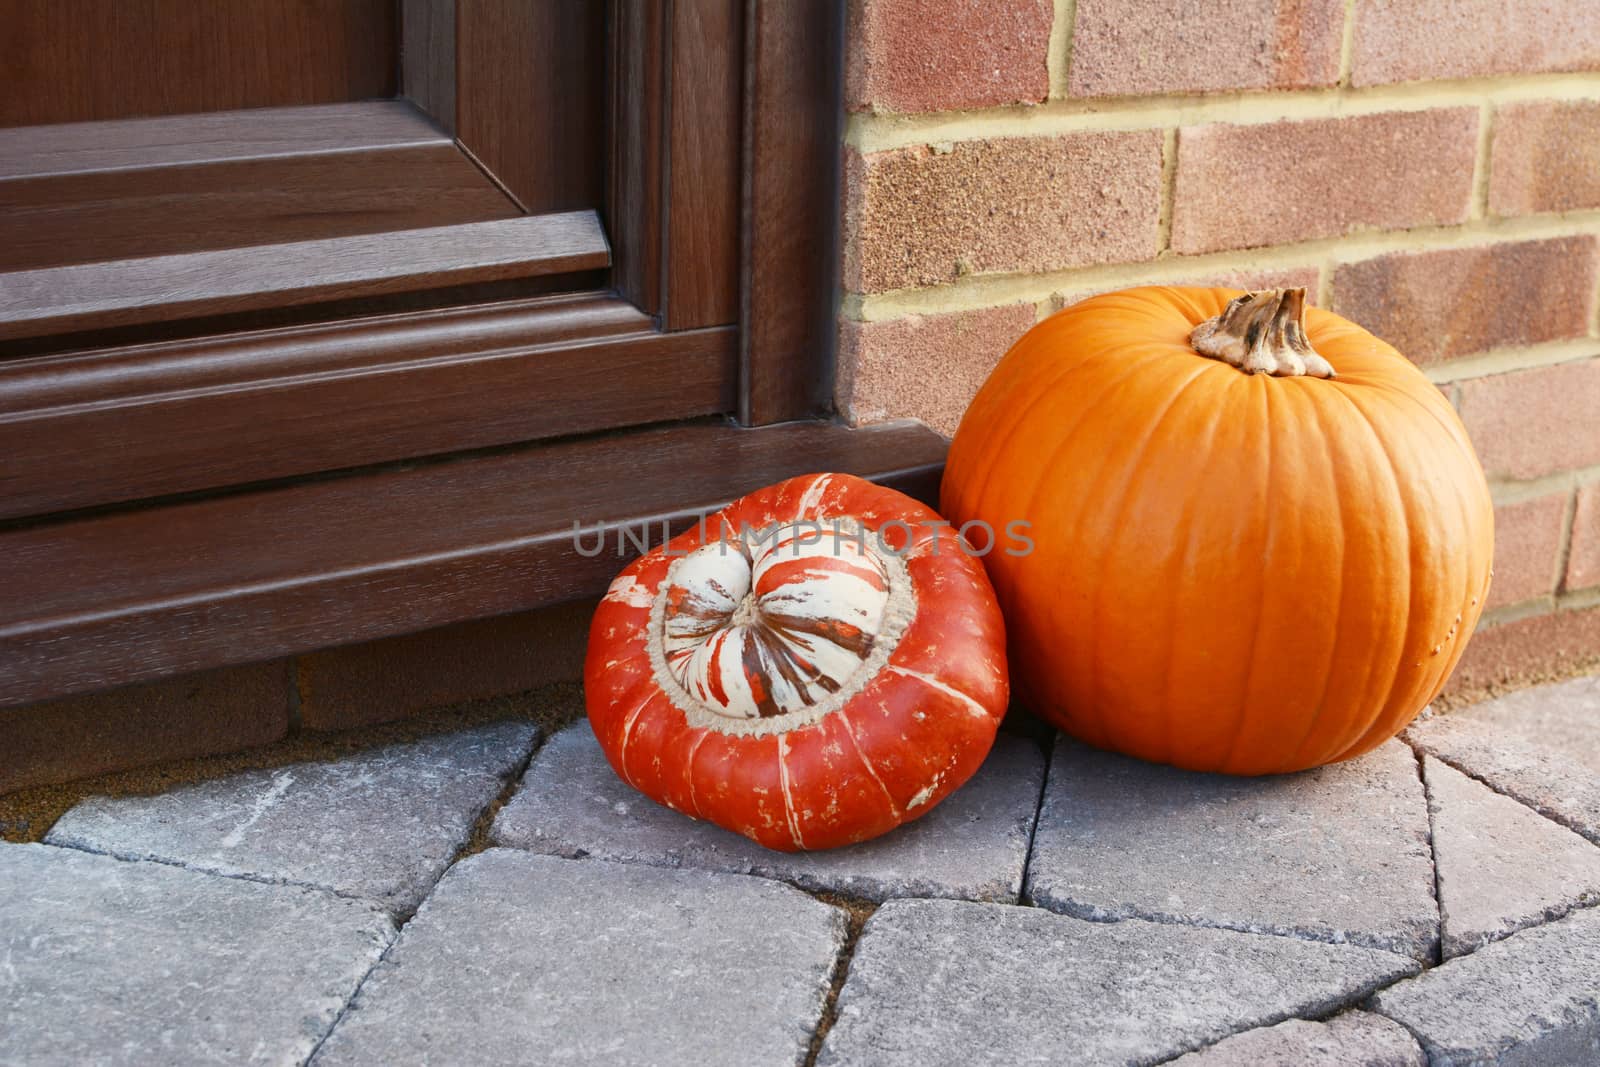 Turks Turban gourd and an orange pumpkin as autumnal decoration on a stone doorstep with copy space